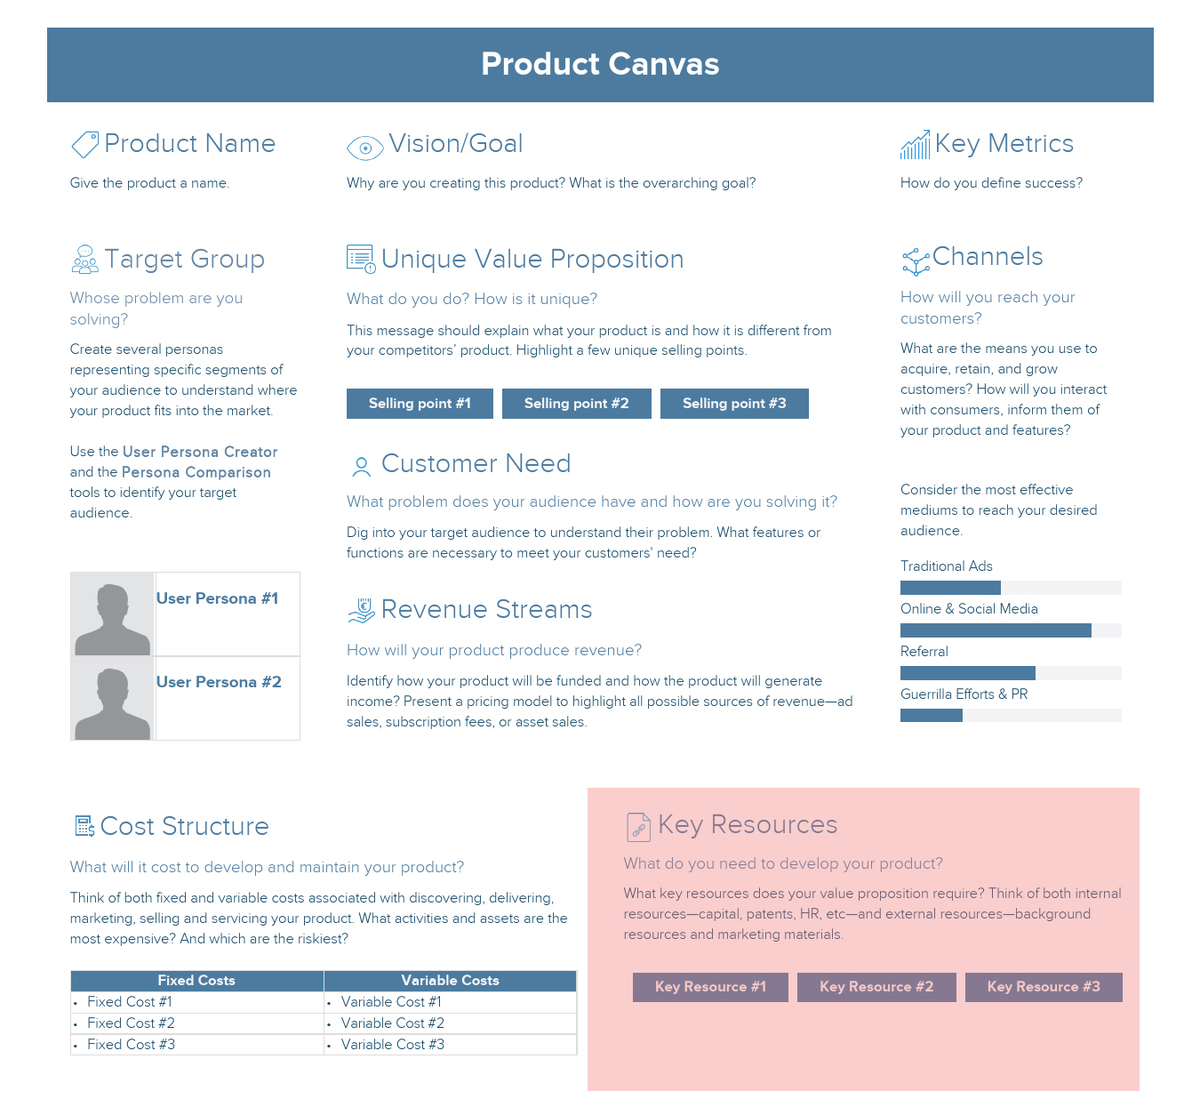 Highlight your key resources | How to Create a Product Canvas